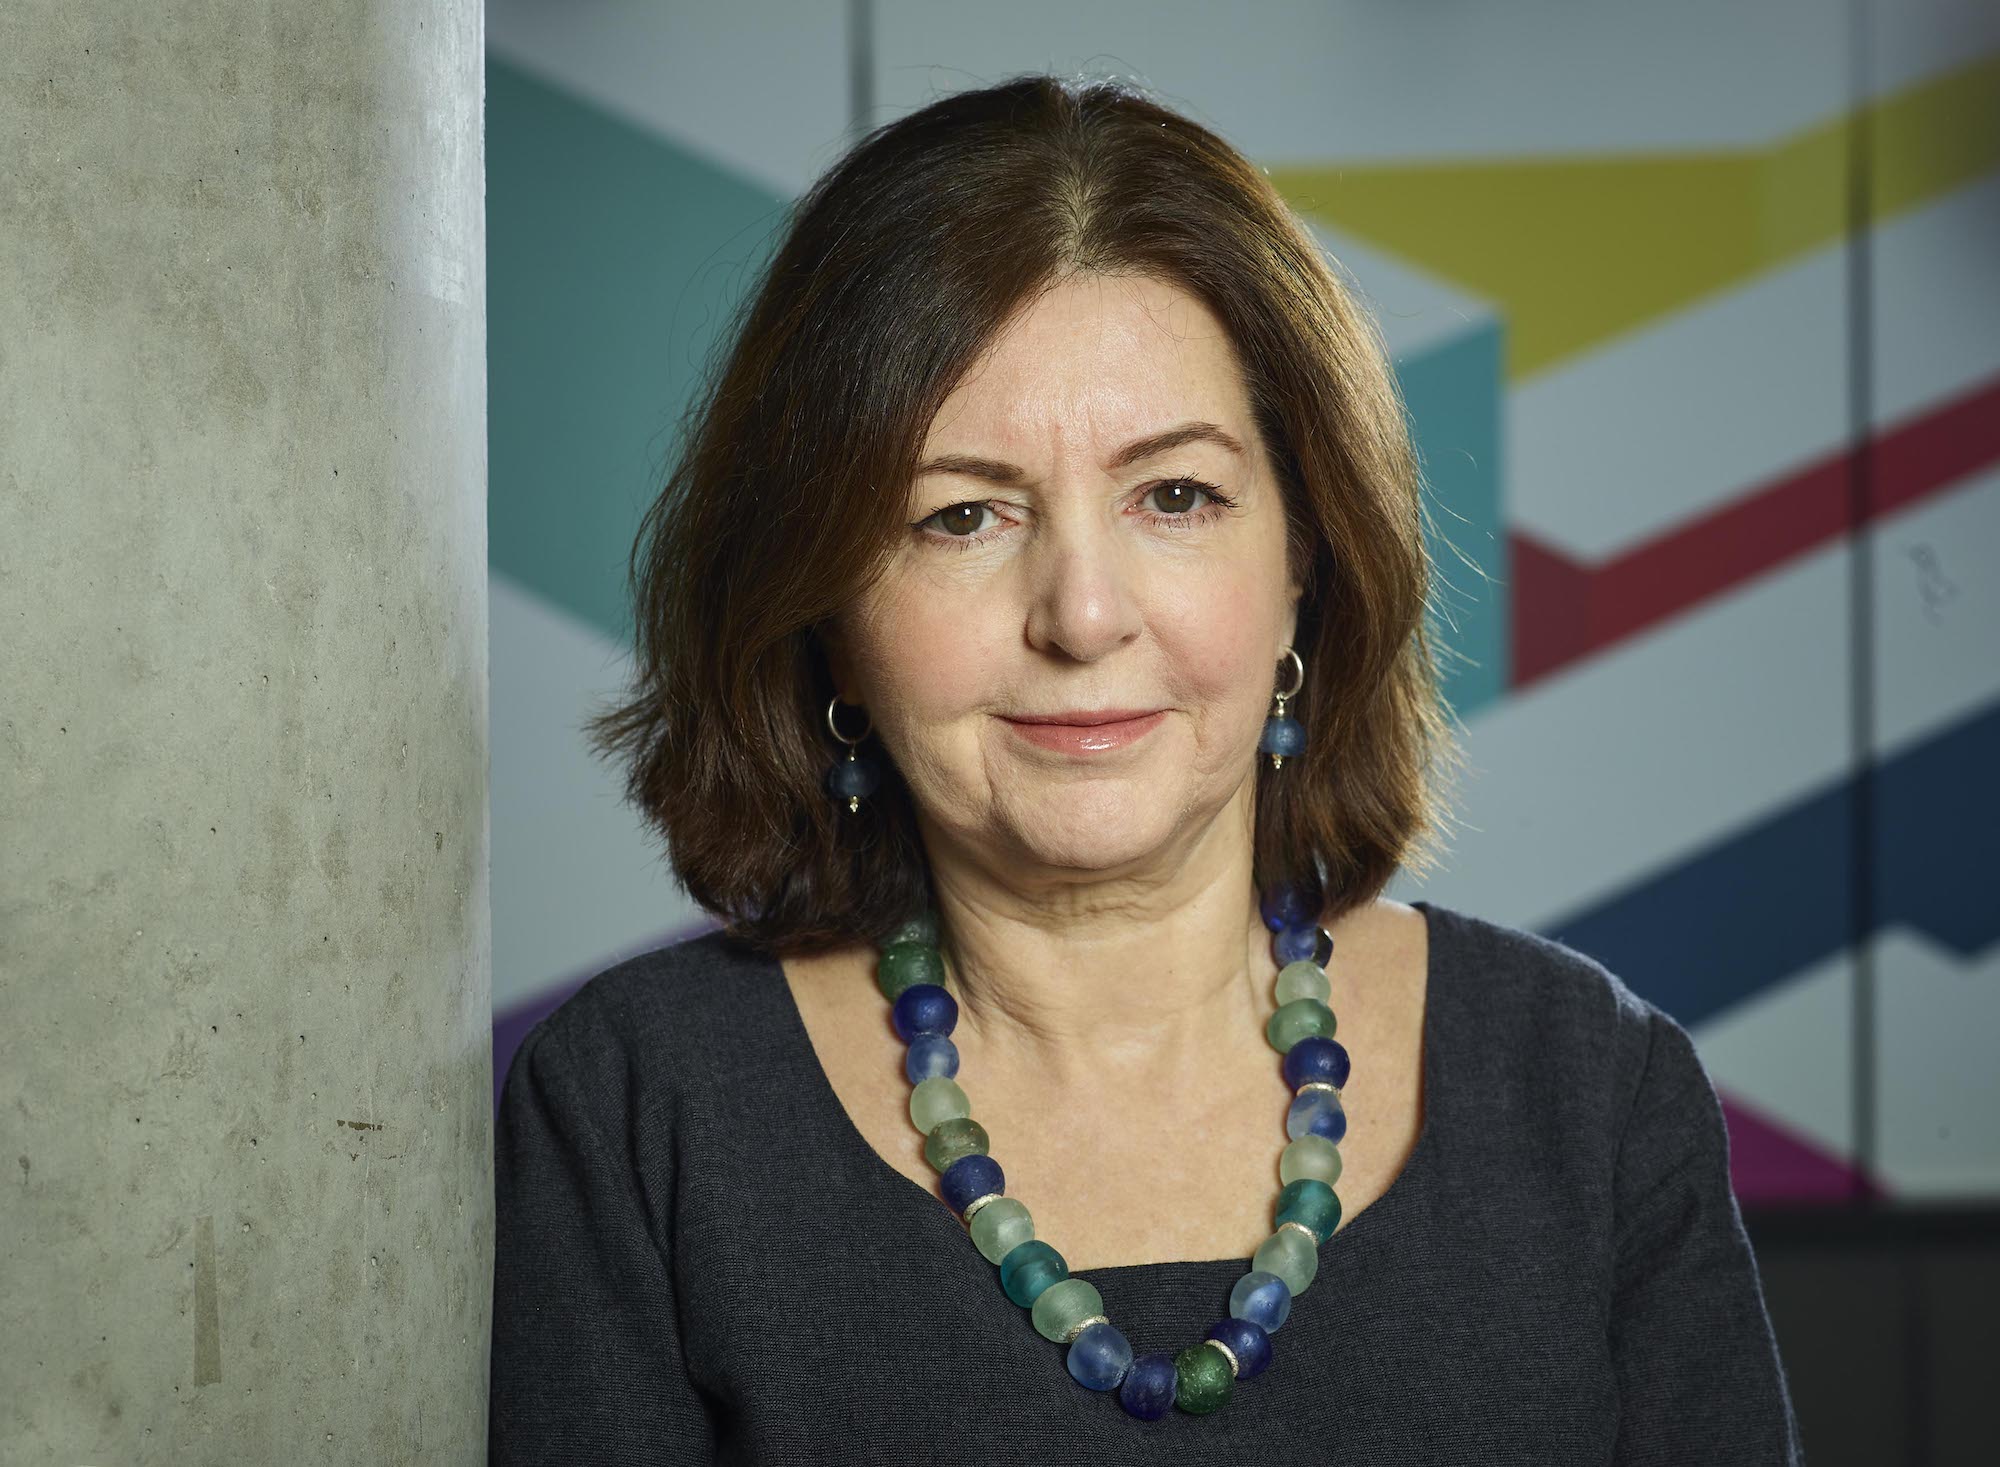 Reuters Seminar: Channel 4 Editor-at-Large Dorothy Byrne on public sector broadcasting and trust in dangerous times